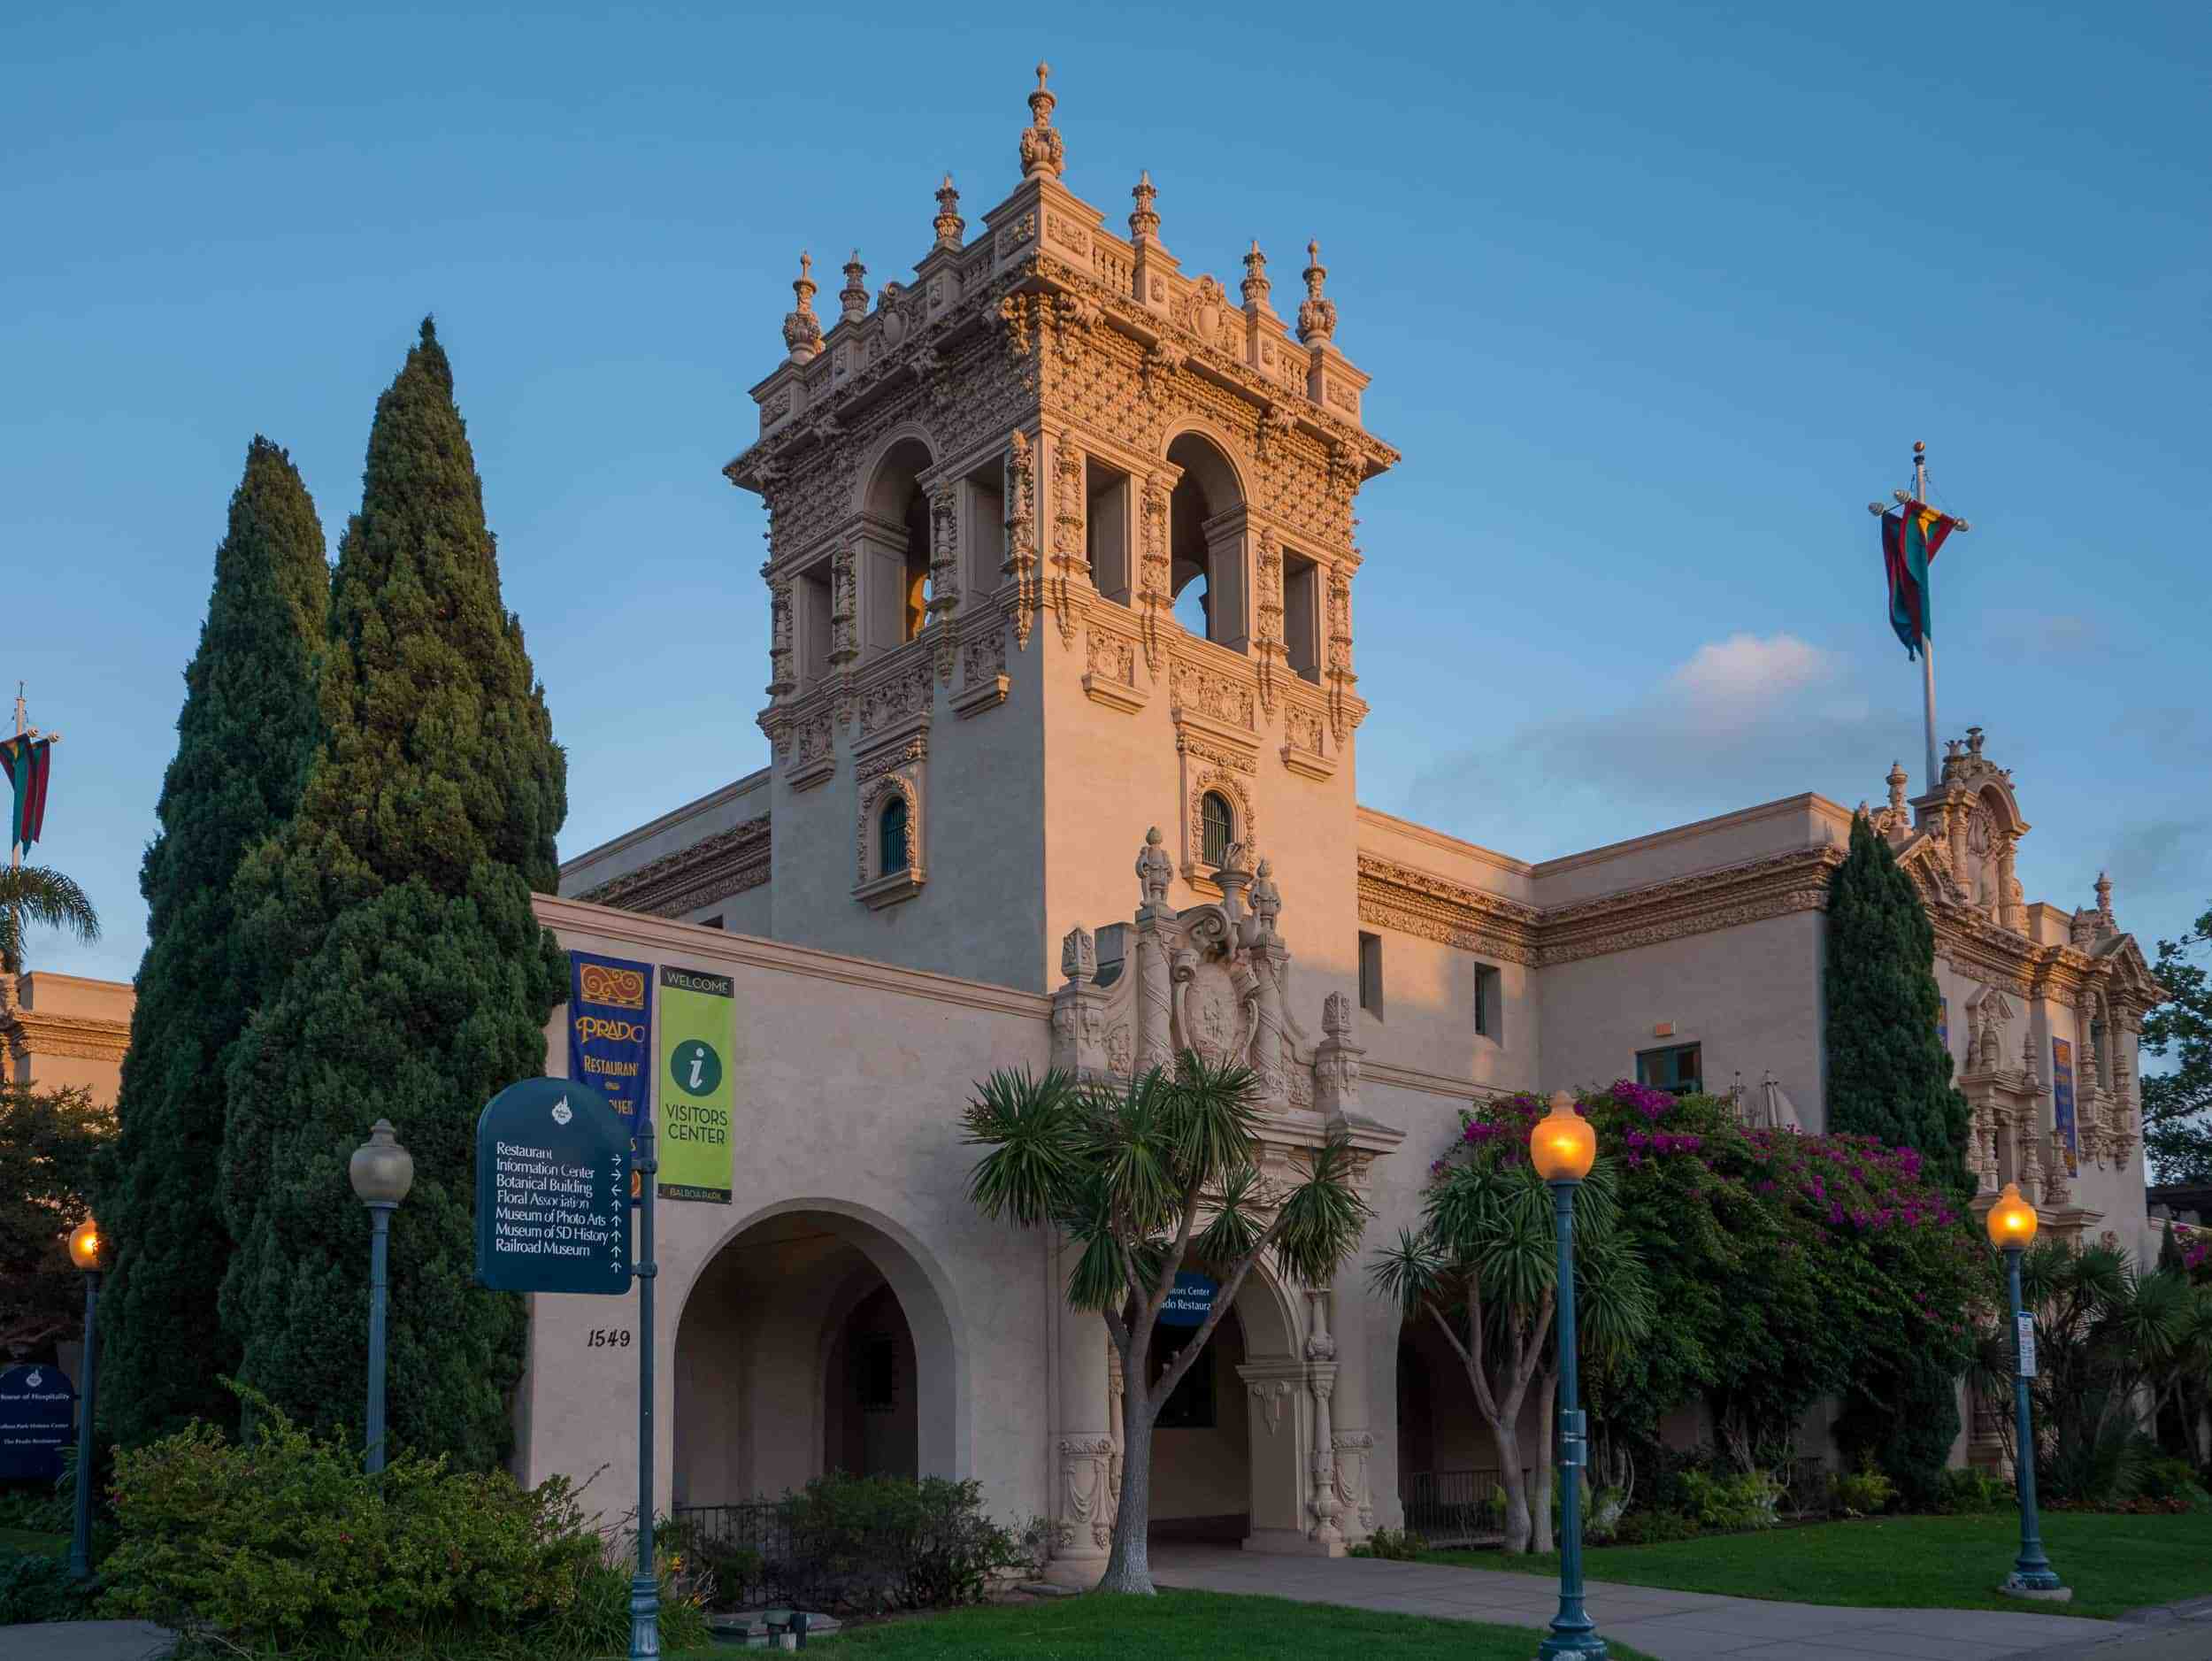 What's going on in Balboa Park today?